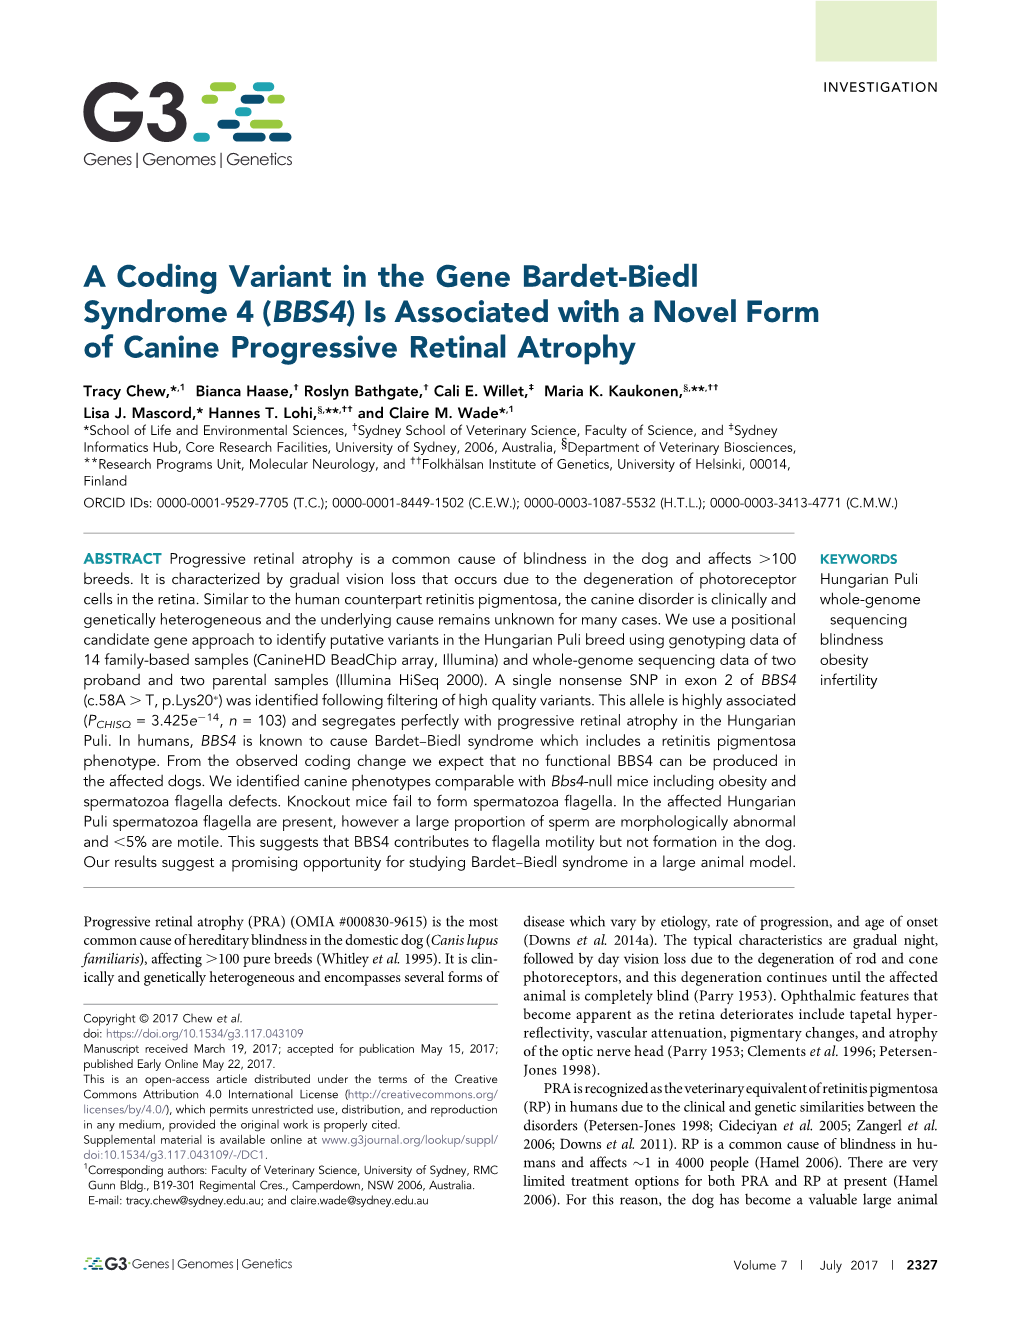 A Coding Variant in the Gene Bardet-Biedl Syndrome 4 (BBS4) Is Associated with a Novel Form of Canine Progressive Retinal Atrophy